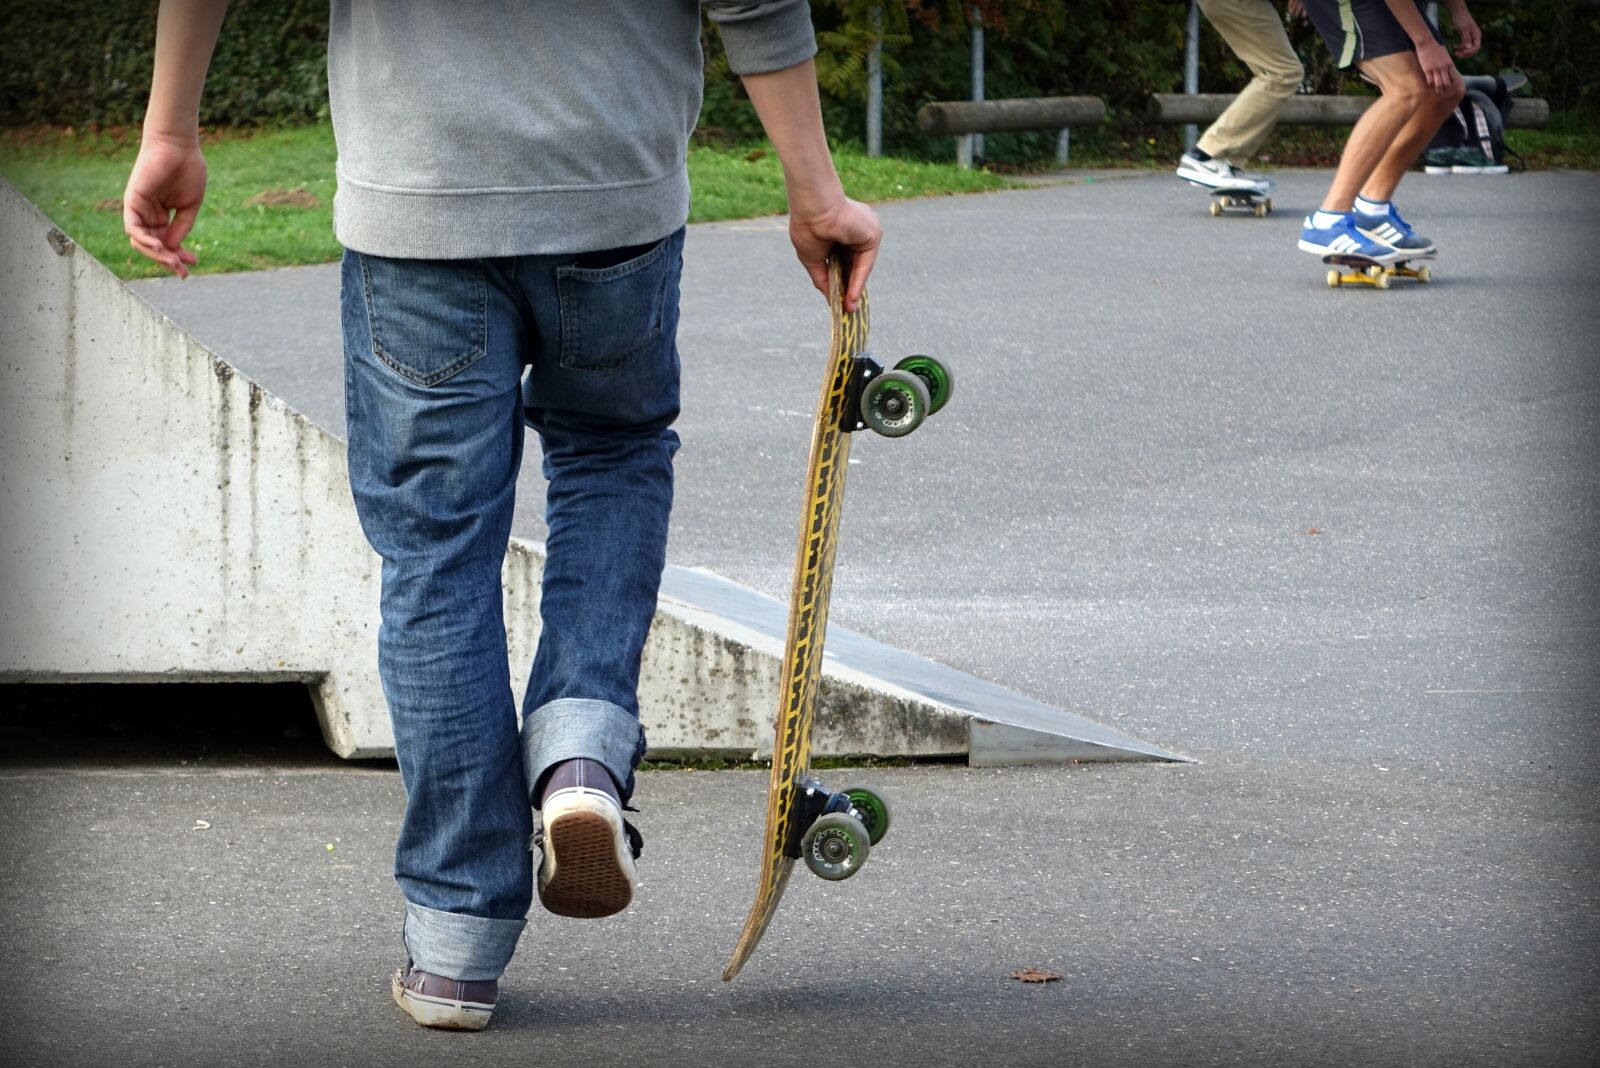 Sony Cyber-shot DSC-RX10 sample photo. Skateboard, roll, young people photography